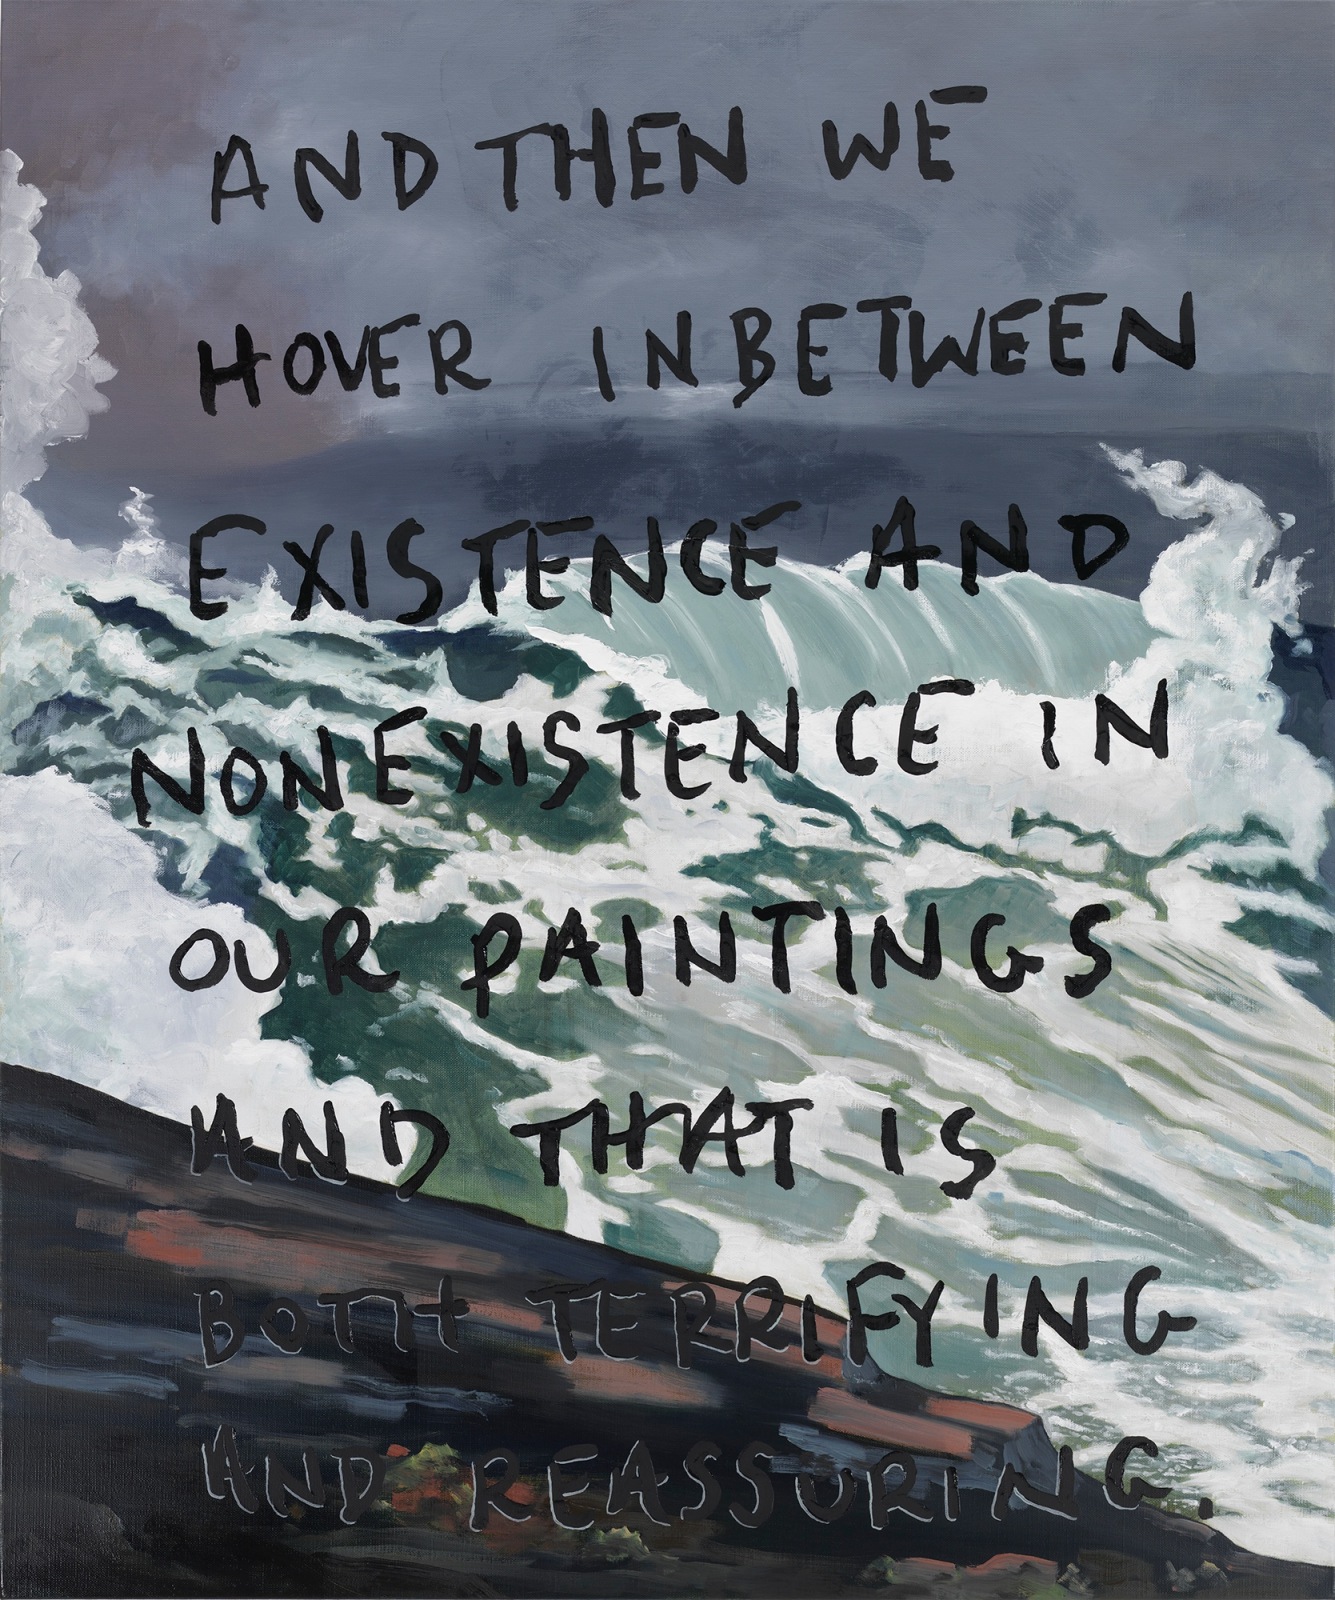 Painting of stormy ocean with rock peaking in from the lower left hand corner. Black text painted over the image reads: And then we hover in between existence and nonexistence in our paintings and that is both horrifying and reassuring.